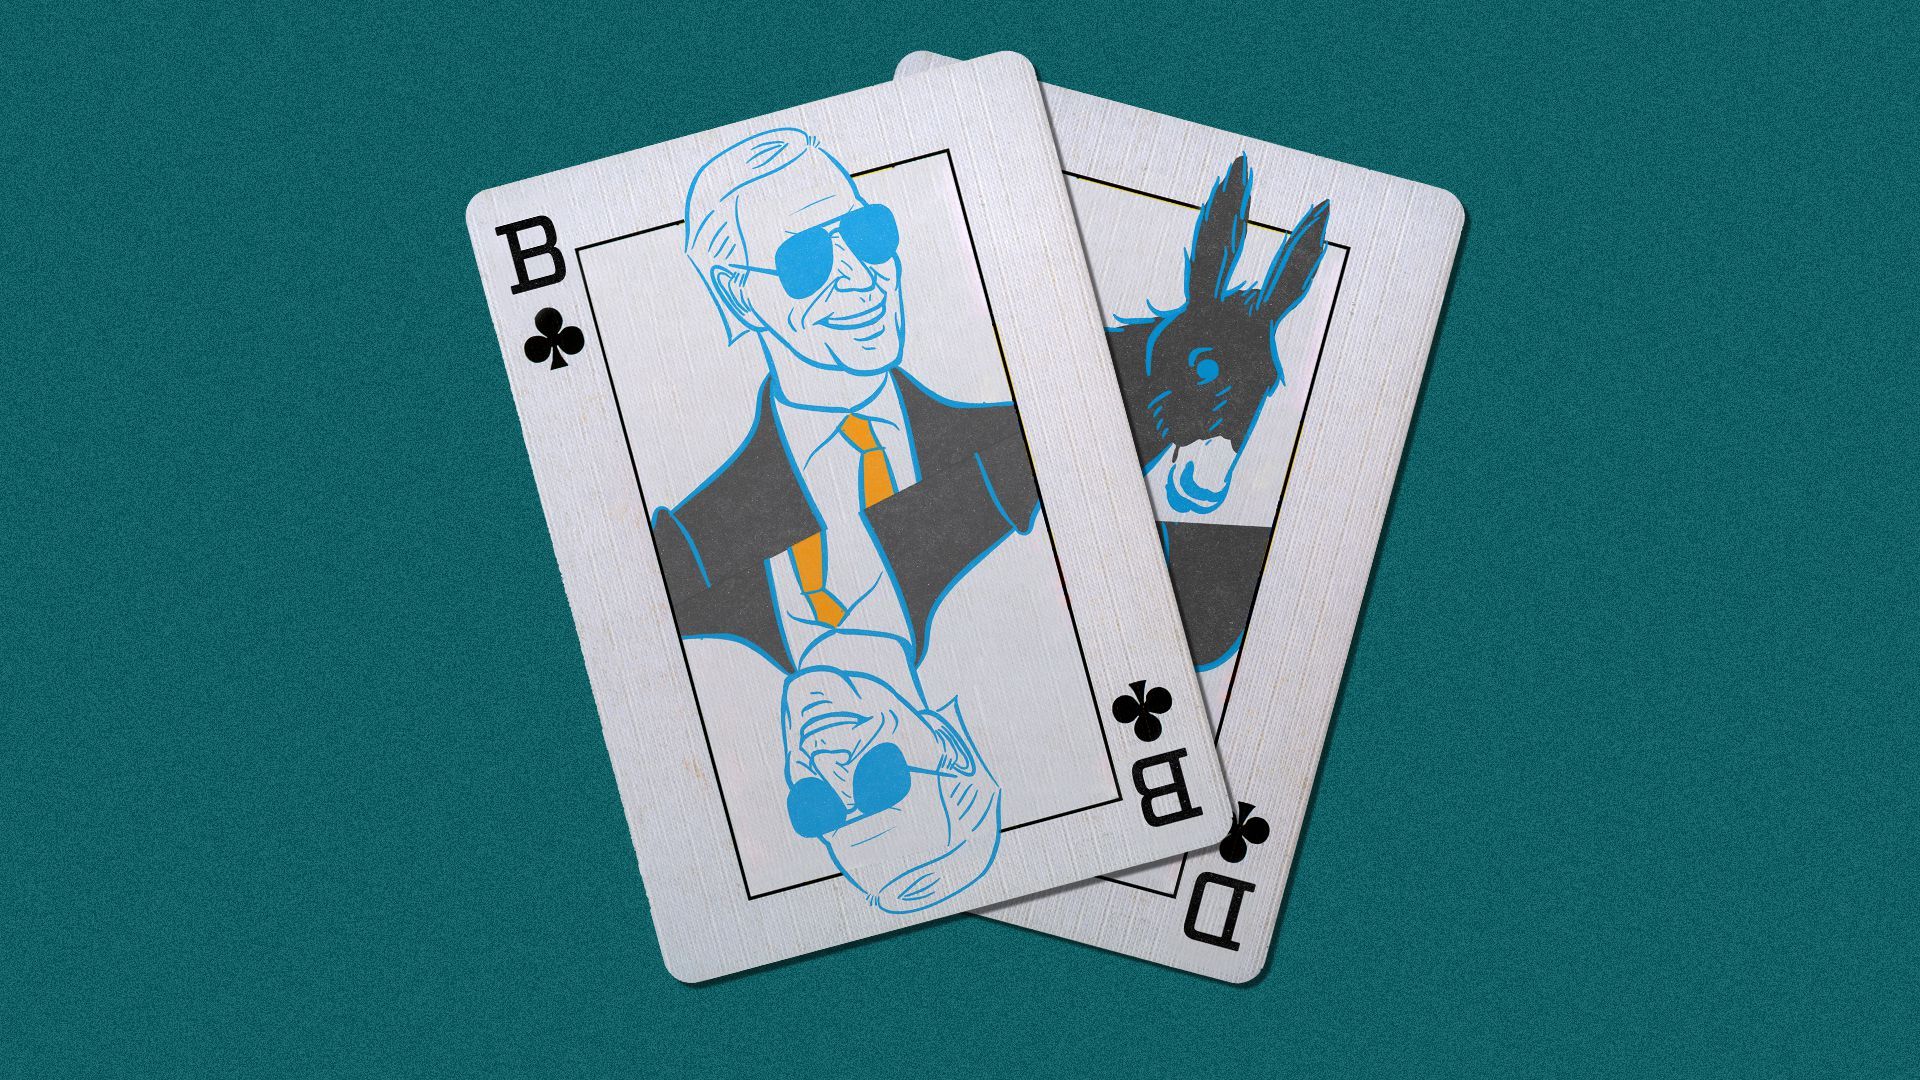 Illustration of two playing cards, one with Joe Biden on it and one with a donkey on it.